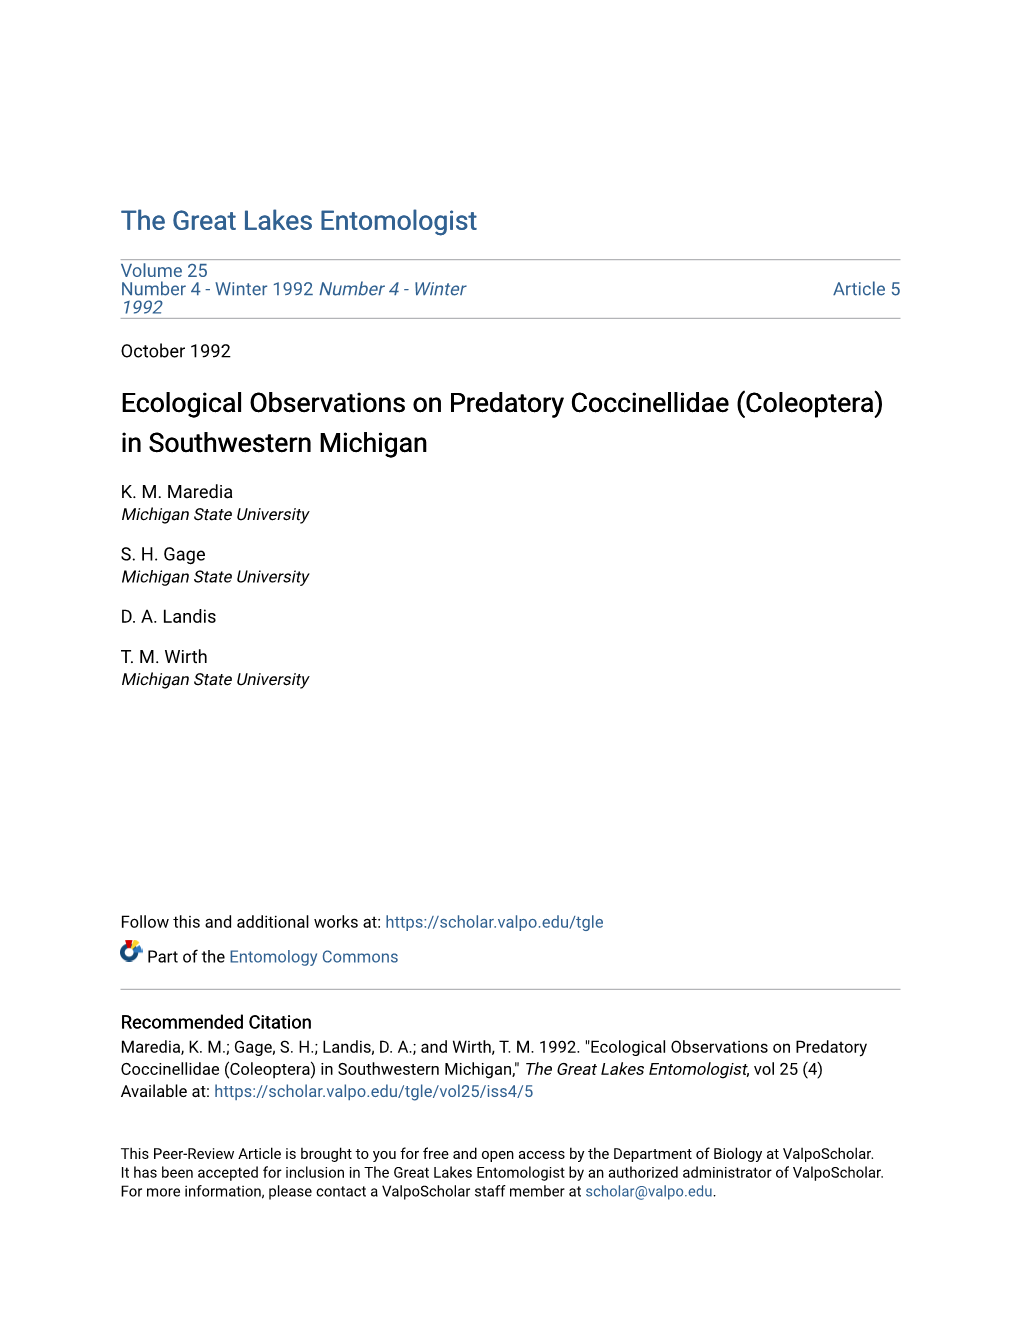 Ecological Observations on Predatory Coccinellidae (Coleoptera) in Southwestern Michigan